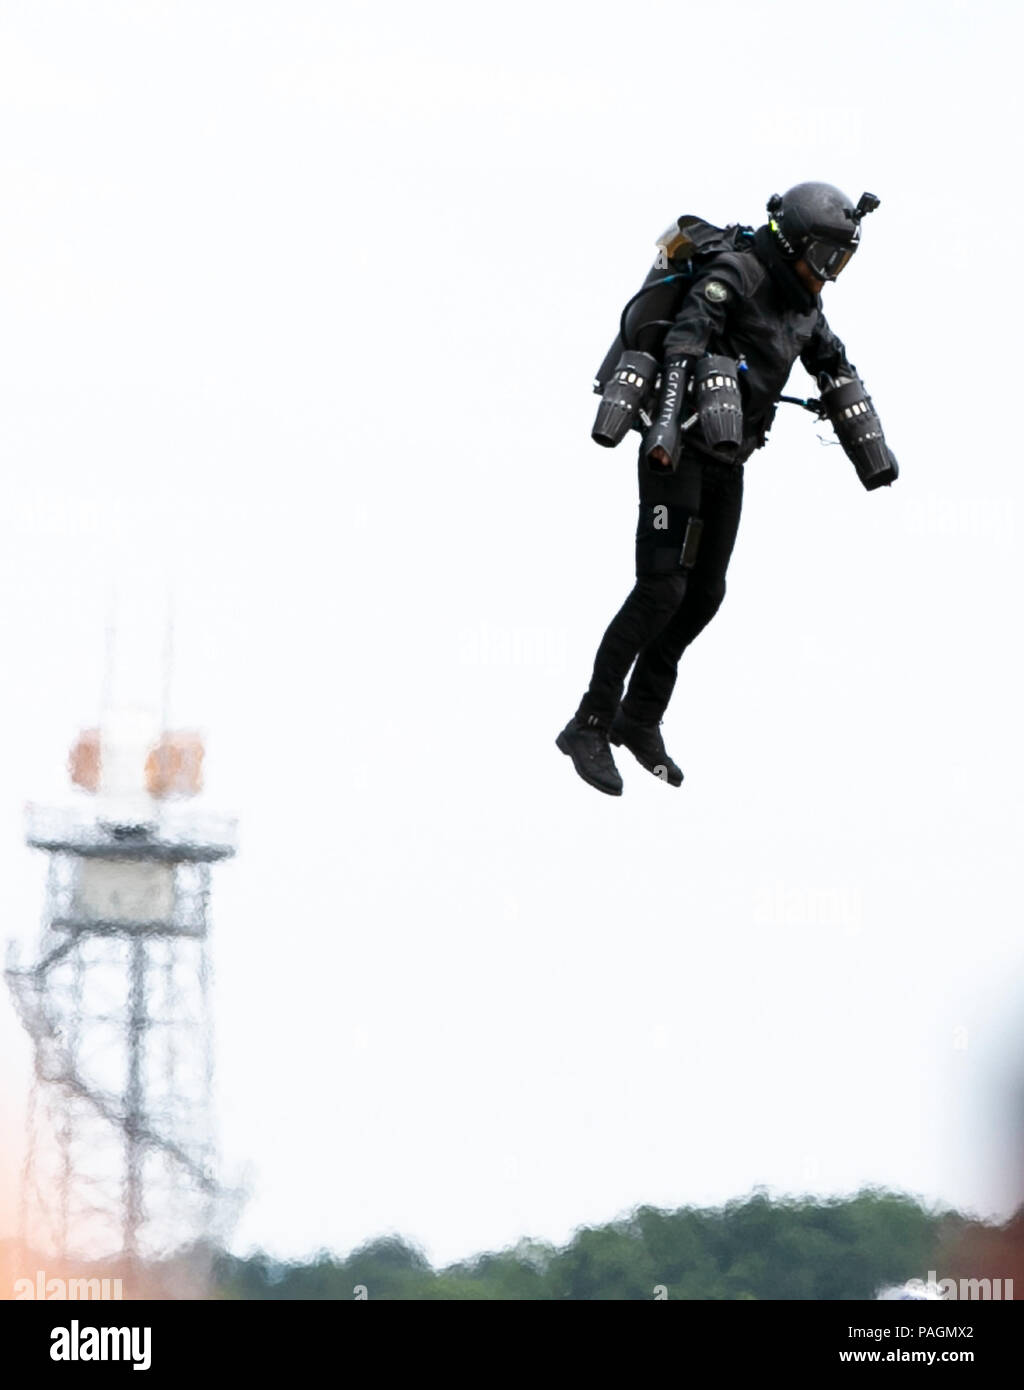 Farnborough, London. 22nd July, 2018. 'Iron Man', Richard Browning, with small jet engines mounted on each arm and behind the suit's back, performs (vertical take-off and flight) at the Farnborough International Airshow, southwest of London, Britain on July 22, 2018. Credit: Han Yan/Xinhua/Alamy Live News Stock Photo